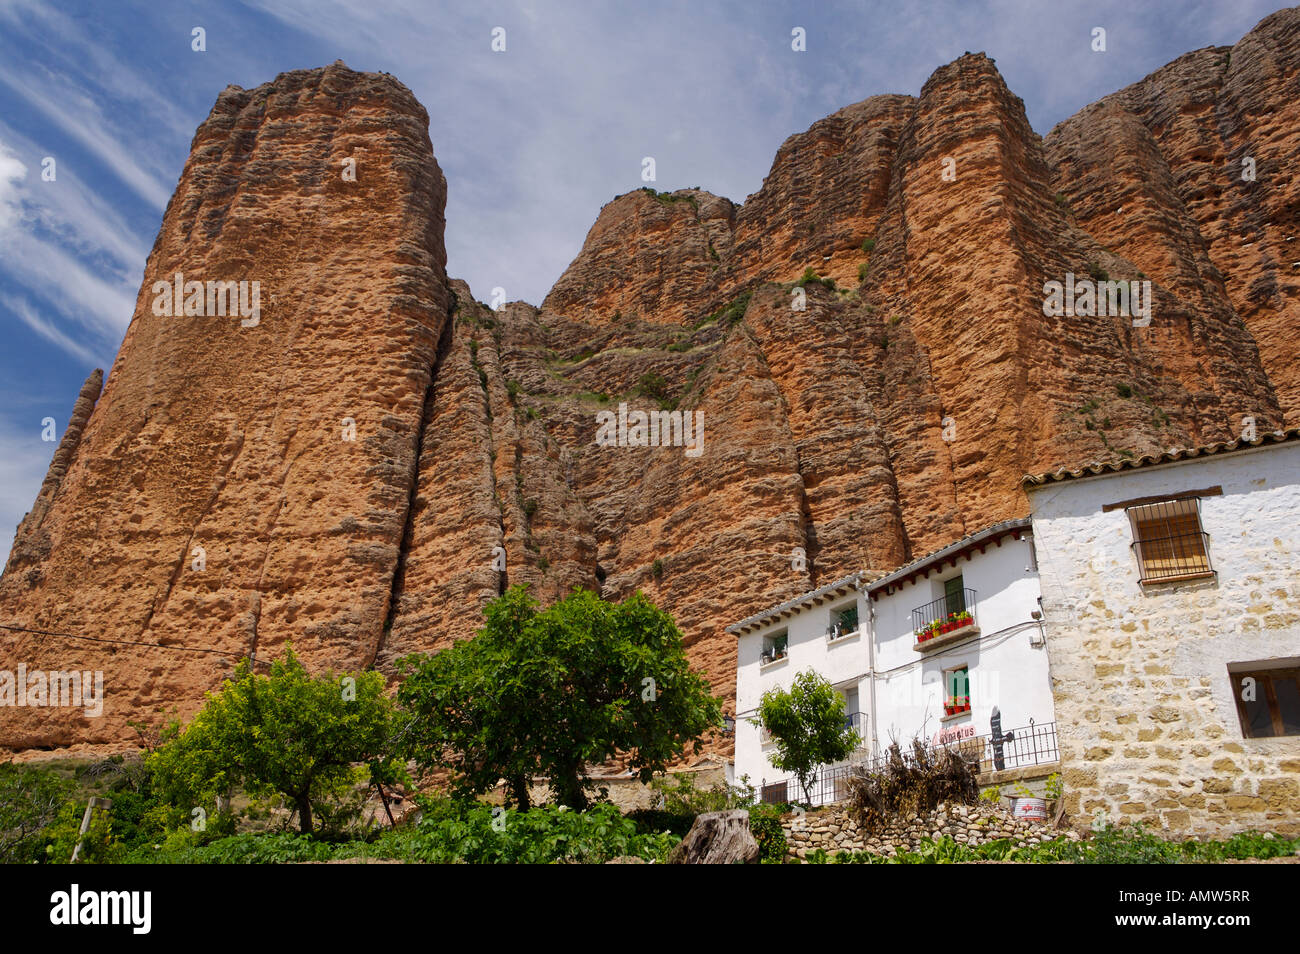 Village of Riglos with the rock formations of Mallos de Riglos towering above, Huesca, Aragon, Spain, Europe. Stock Photo